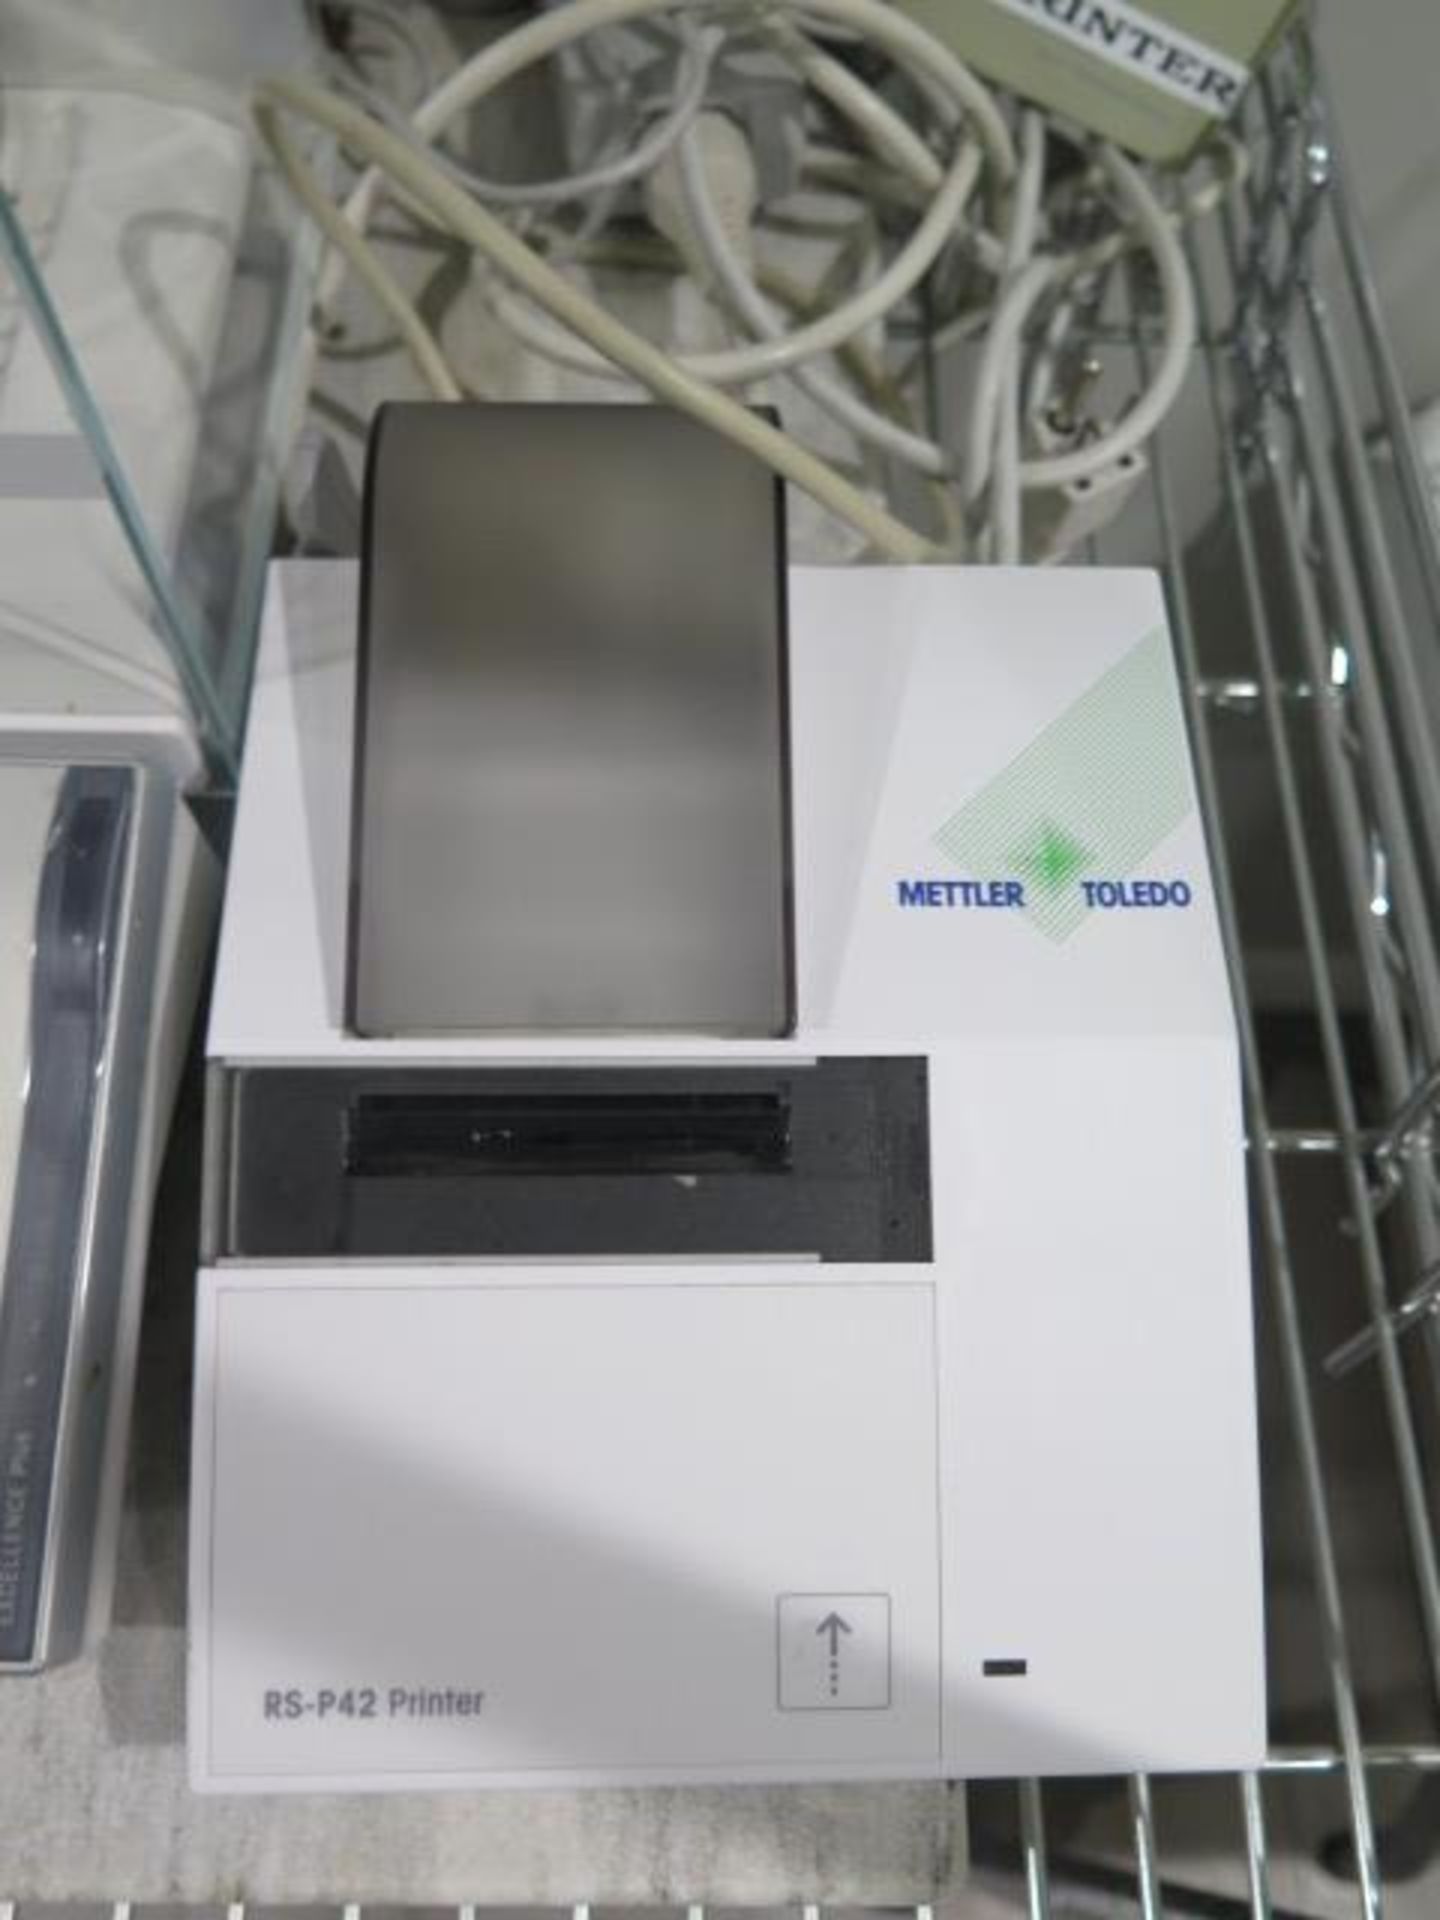 Mettler Toledo XP205 DeltaRange Analytical Balance Scale 0.01mg-220g w/ Static Detect, SOLD AS IS - Image 6 of 9